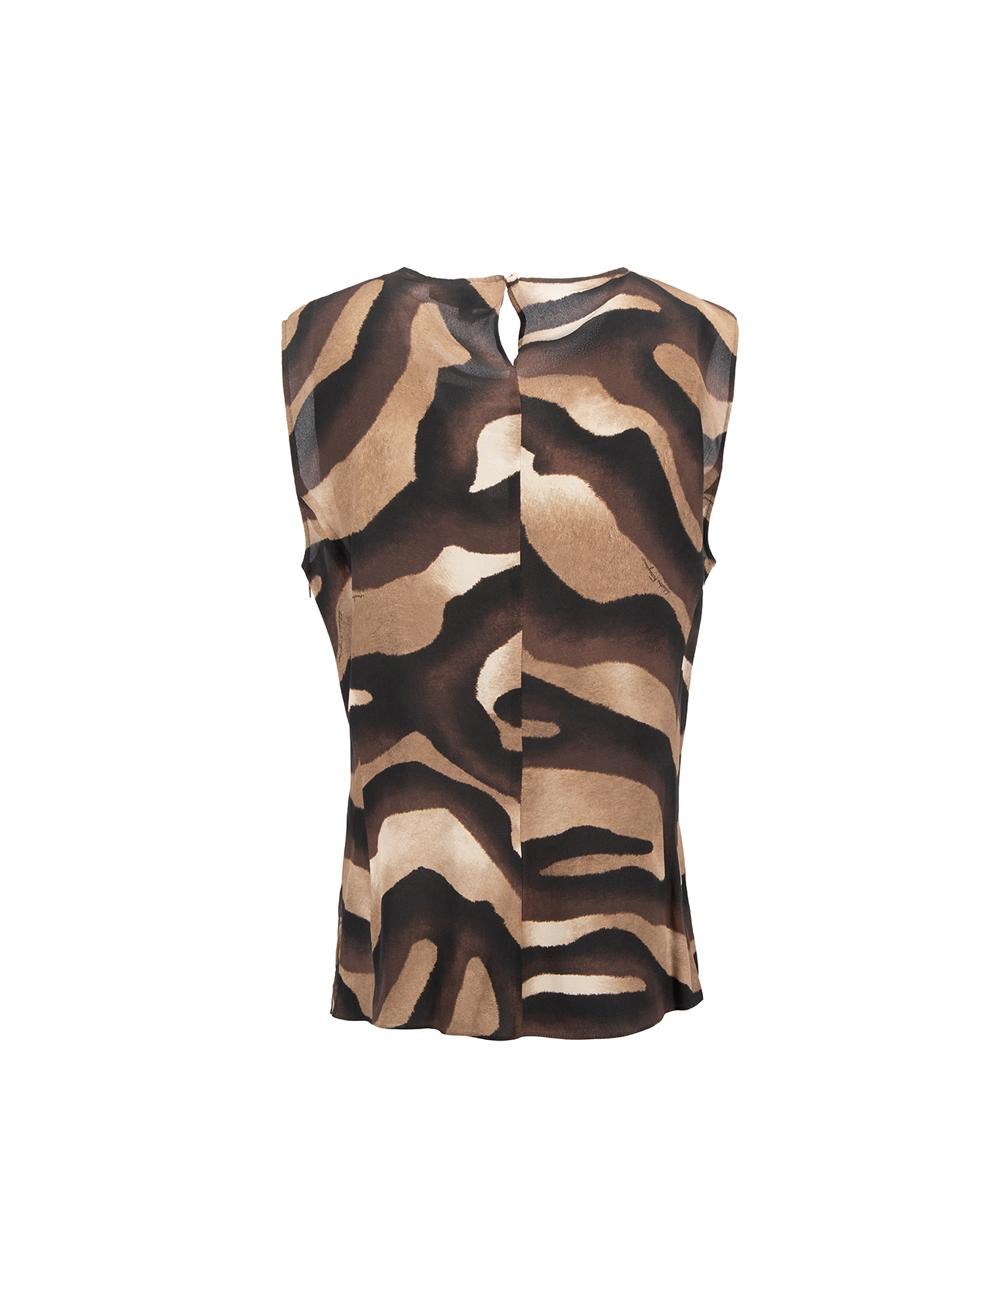 Brown Animal Print Asymmetric Lace Trim Top Size XL In Good Condition For Sale In London, GB